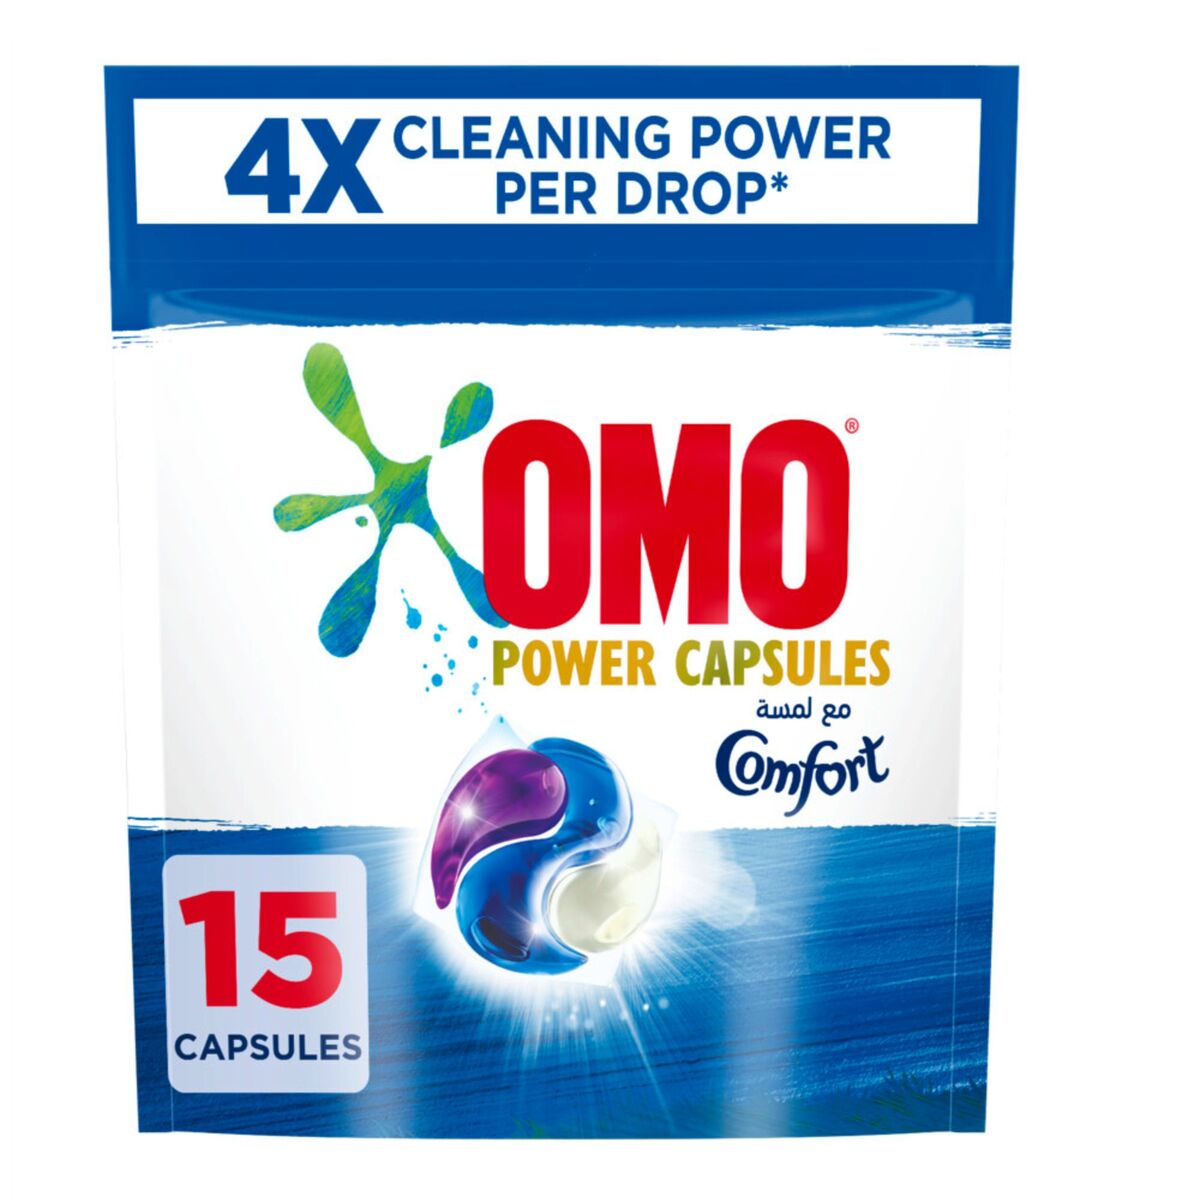 Omo 3-in-1 Power Capsules with Touch of Comfort 15 Pods 390 g